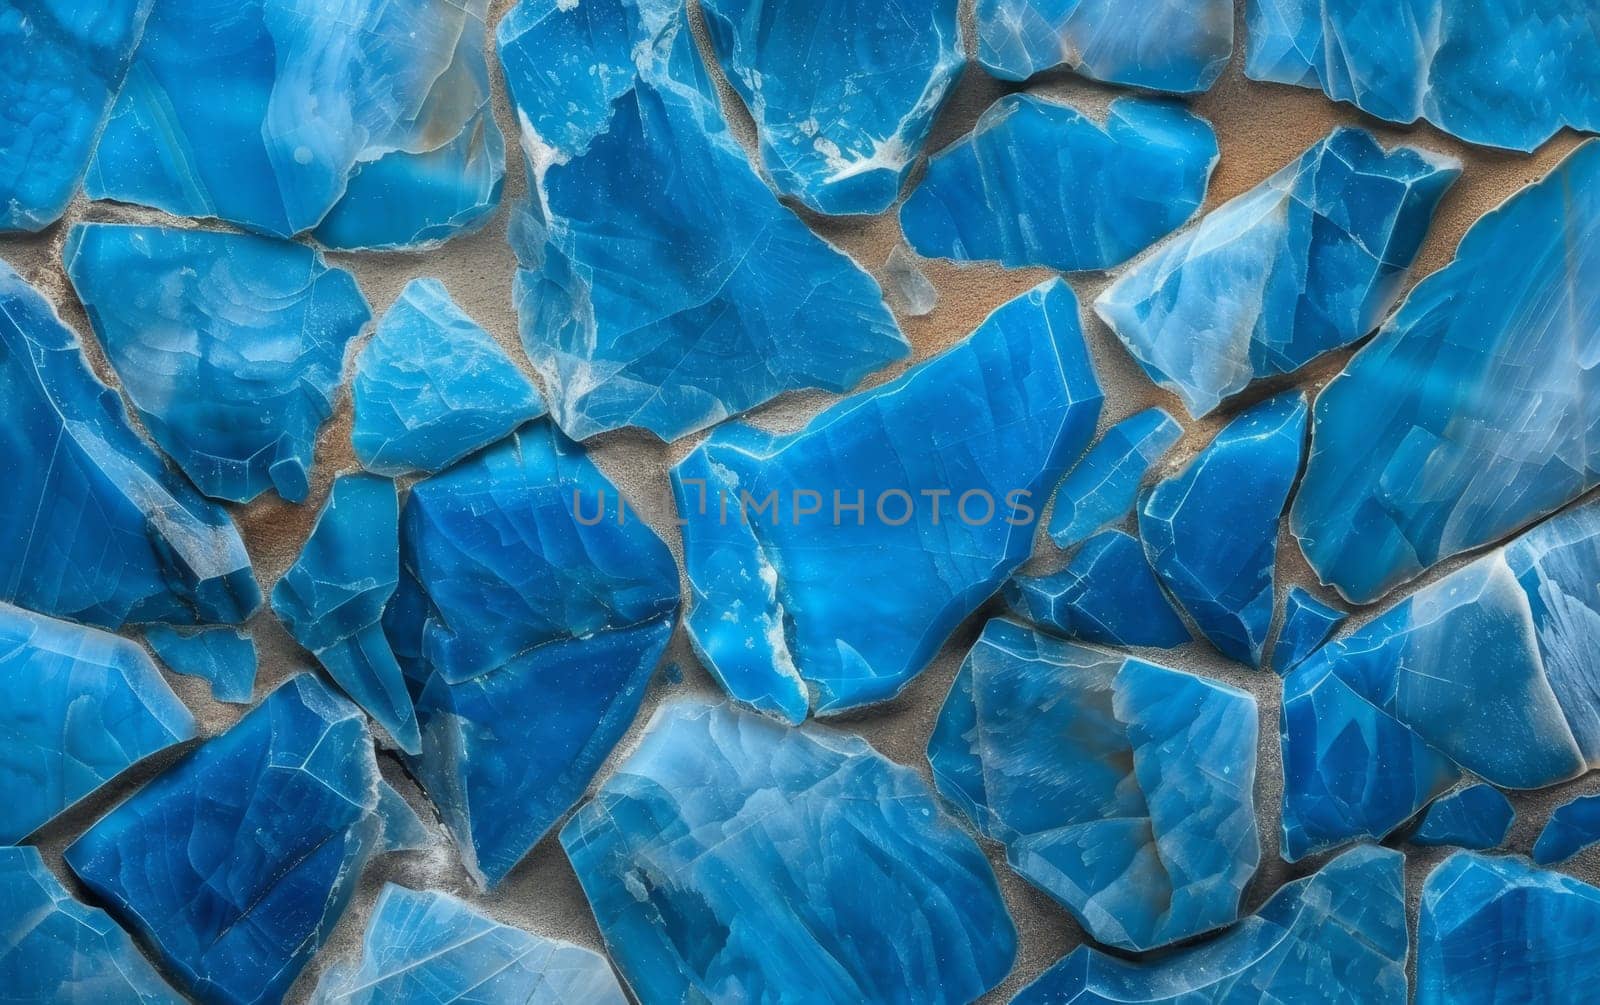 Close-up view of a wall made of irregularly shaped stones in various shades of blue